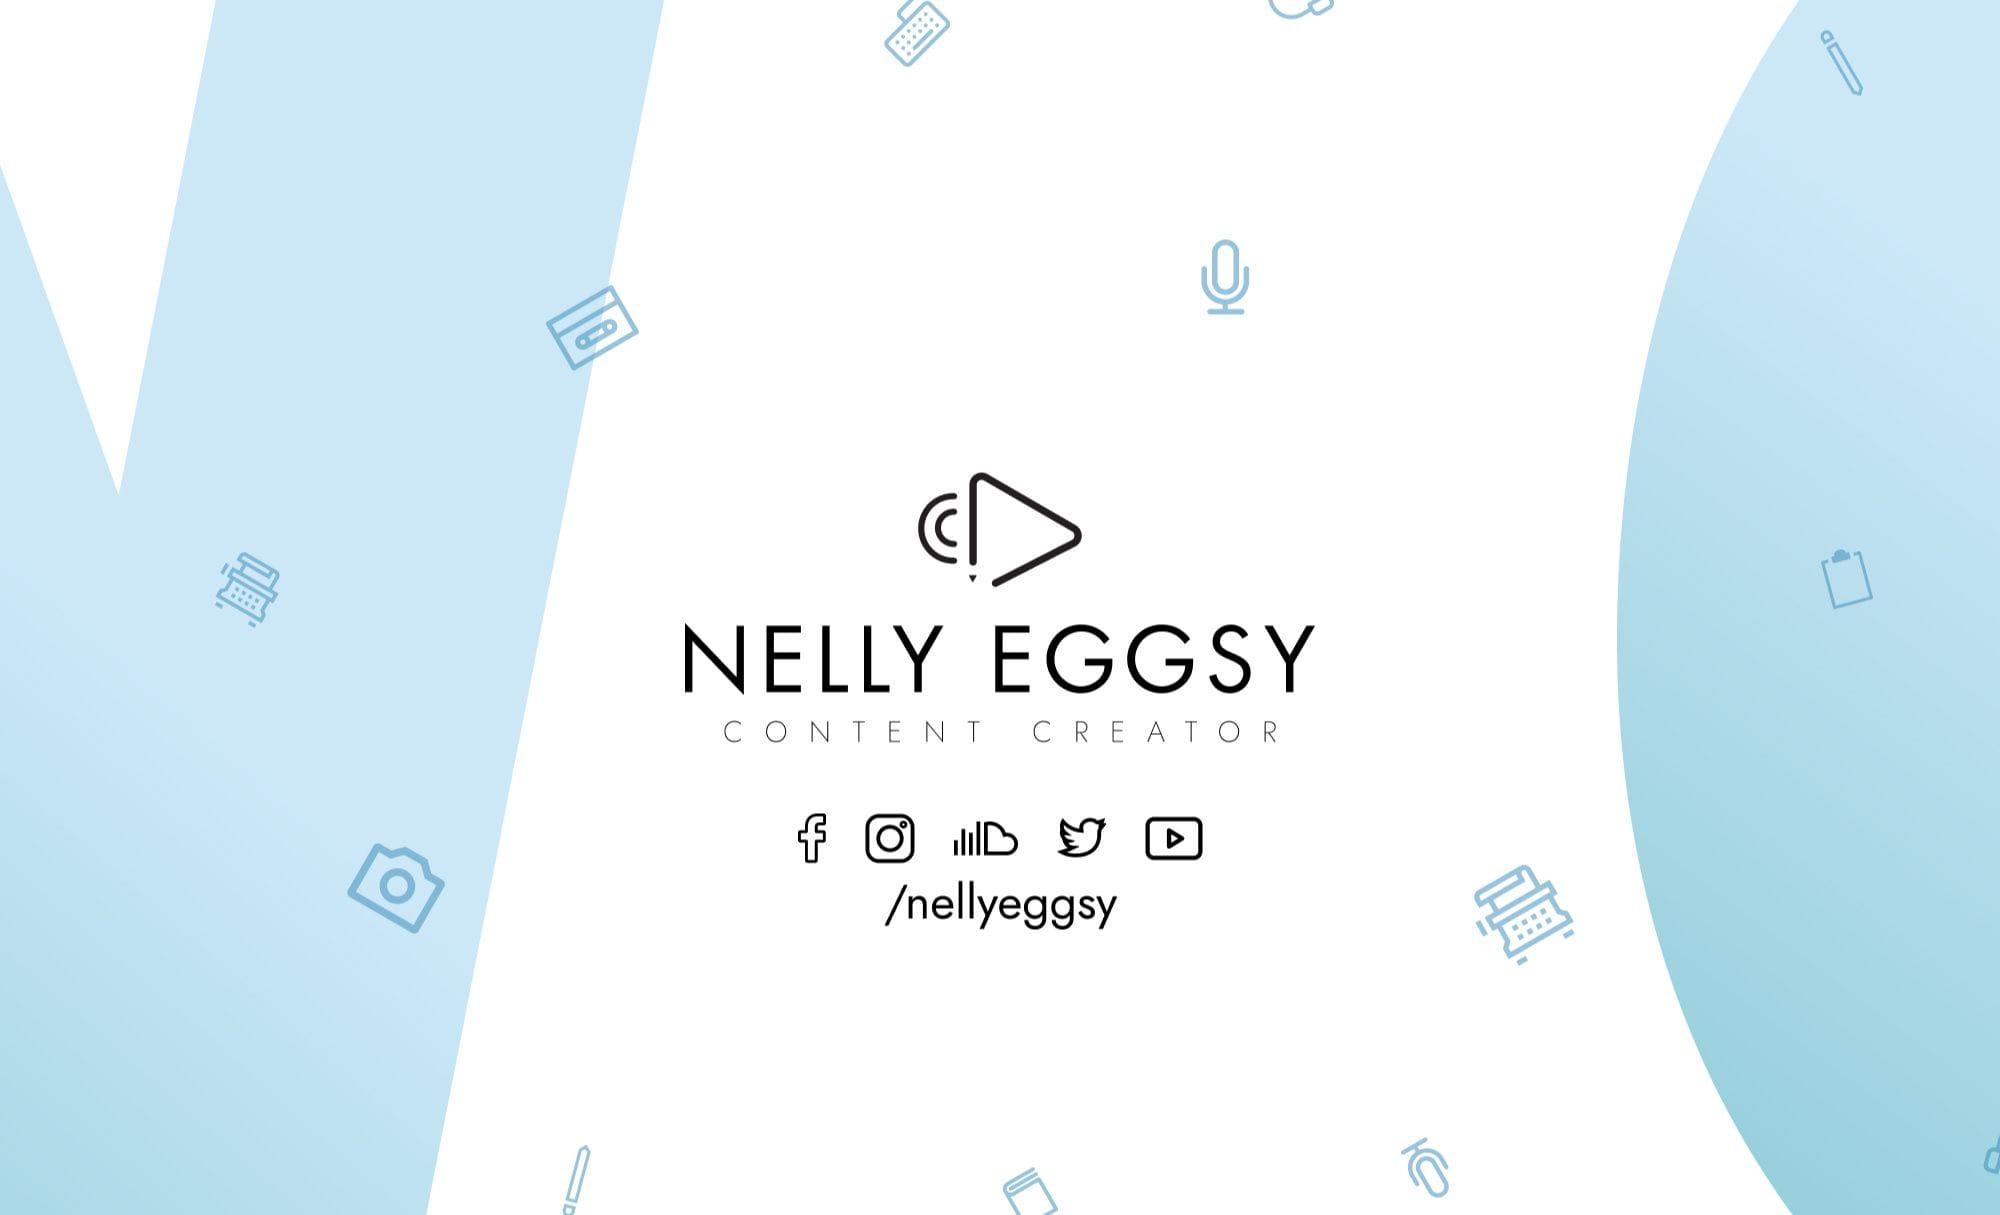 The Nelly Eggsy Brand